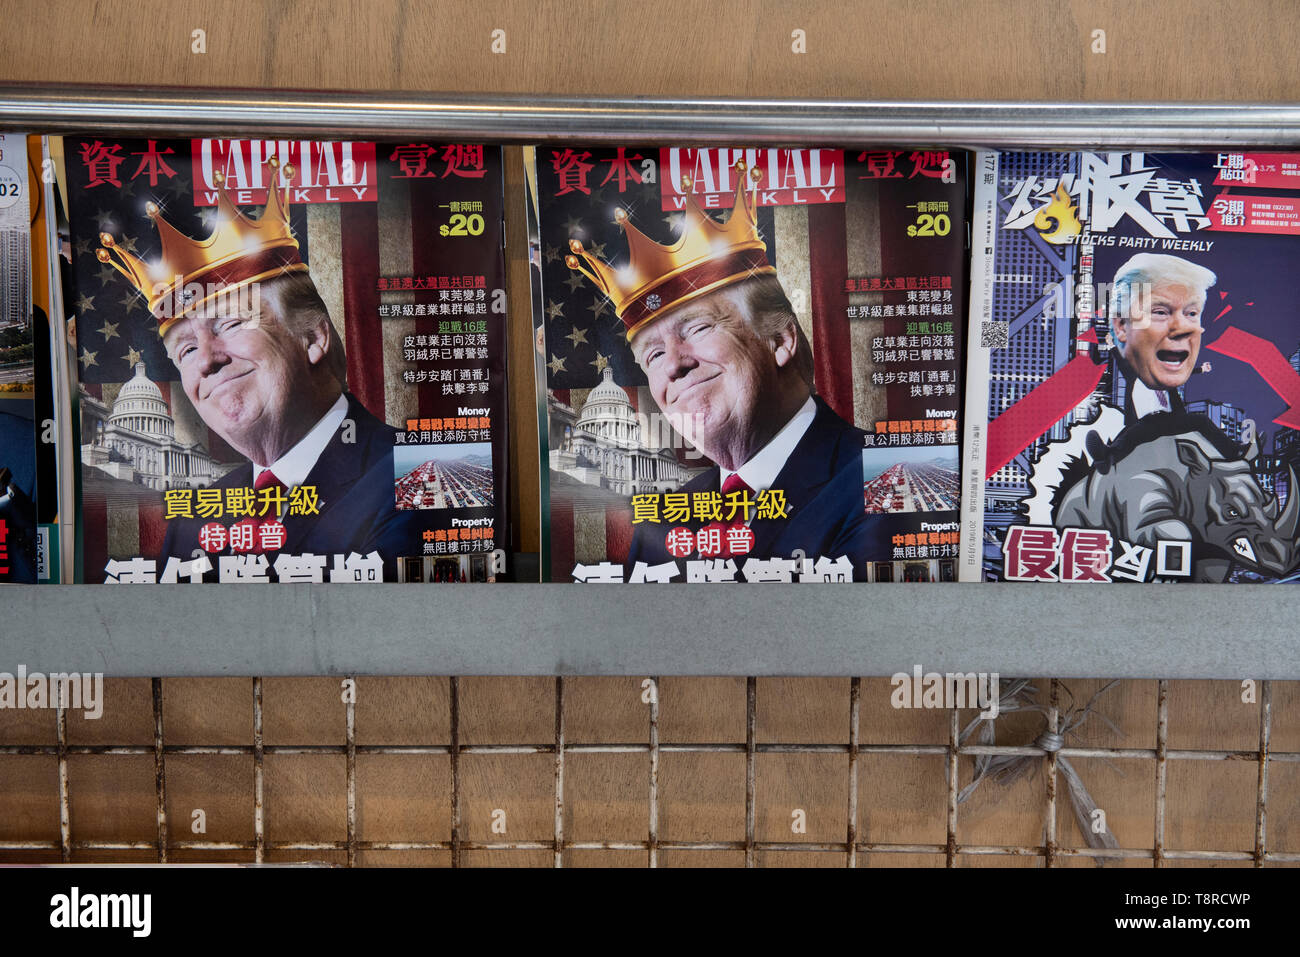 A street news kiosk stand seen selling magazines portraying American president Donald Trump on their covers in Hong Kong. Stock Photo